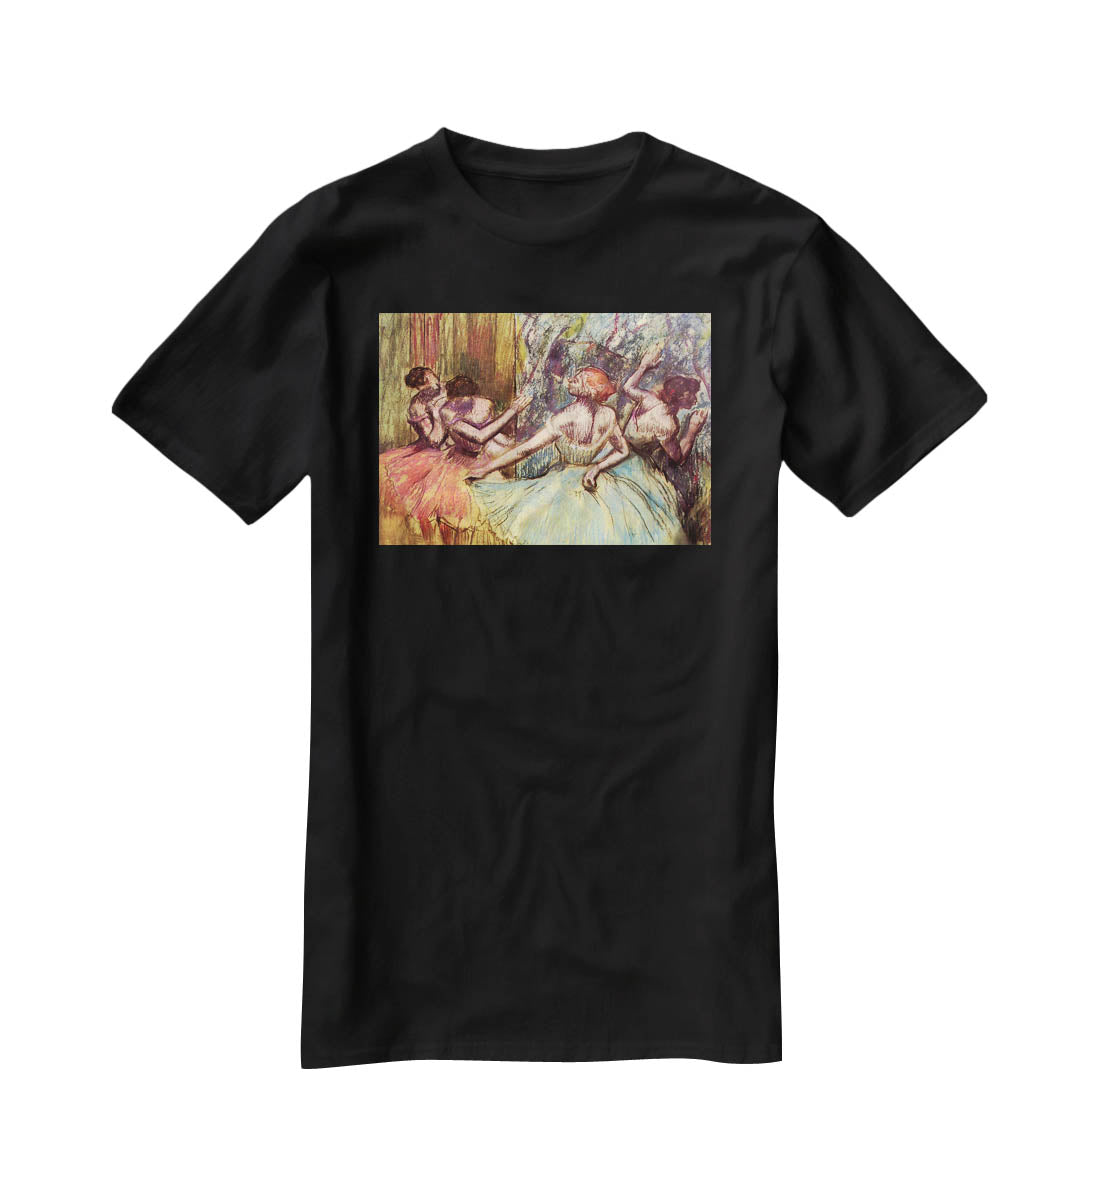 Four dancers behind the scenes 2 by Degas T-Shirt - Canvas Art Rocks - 1